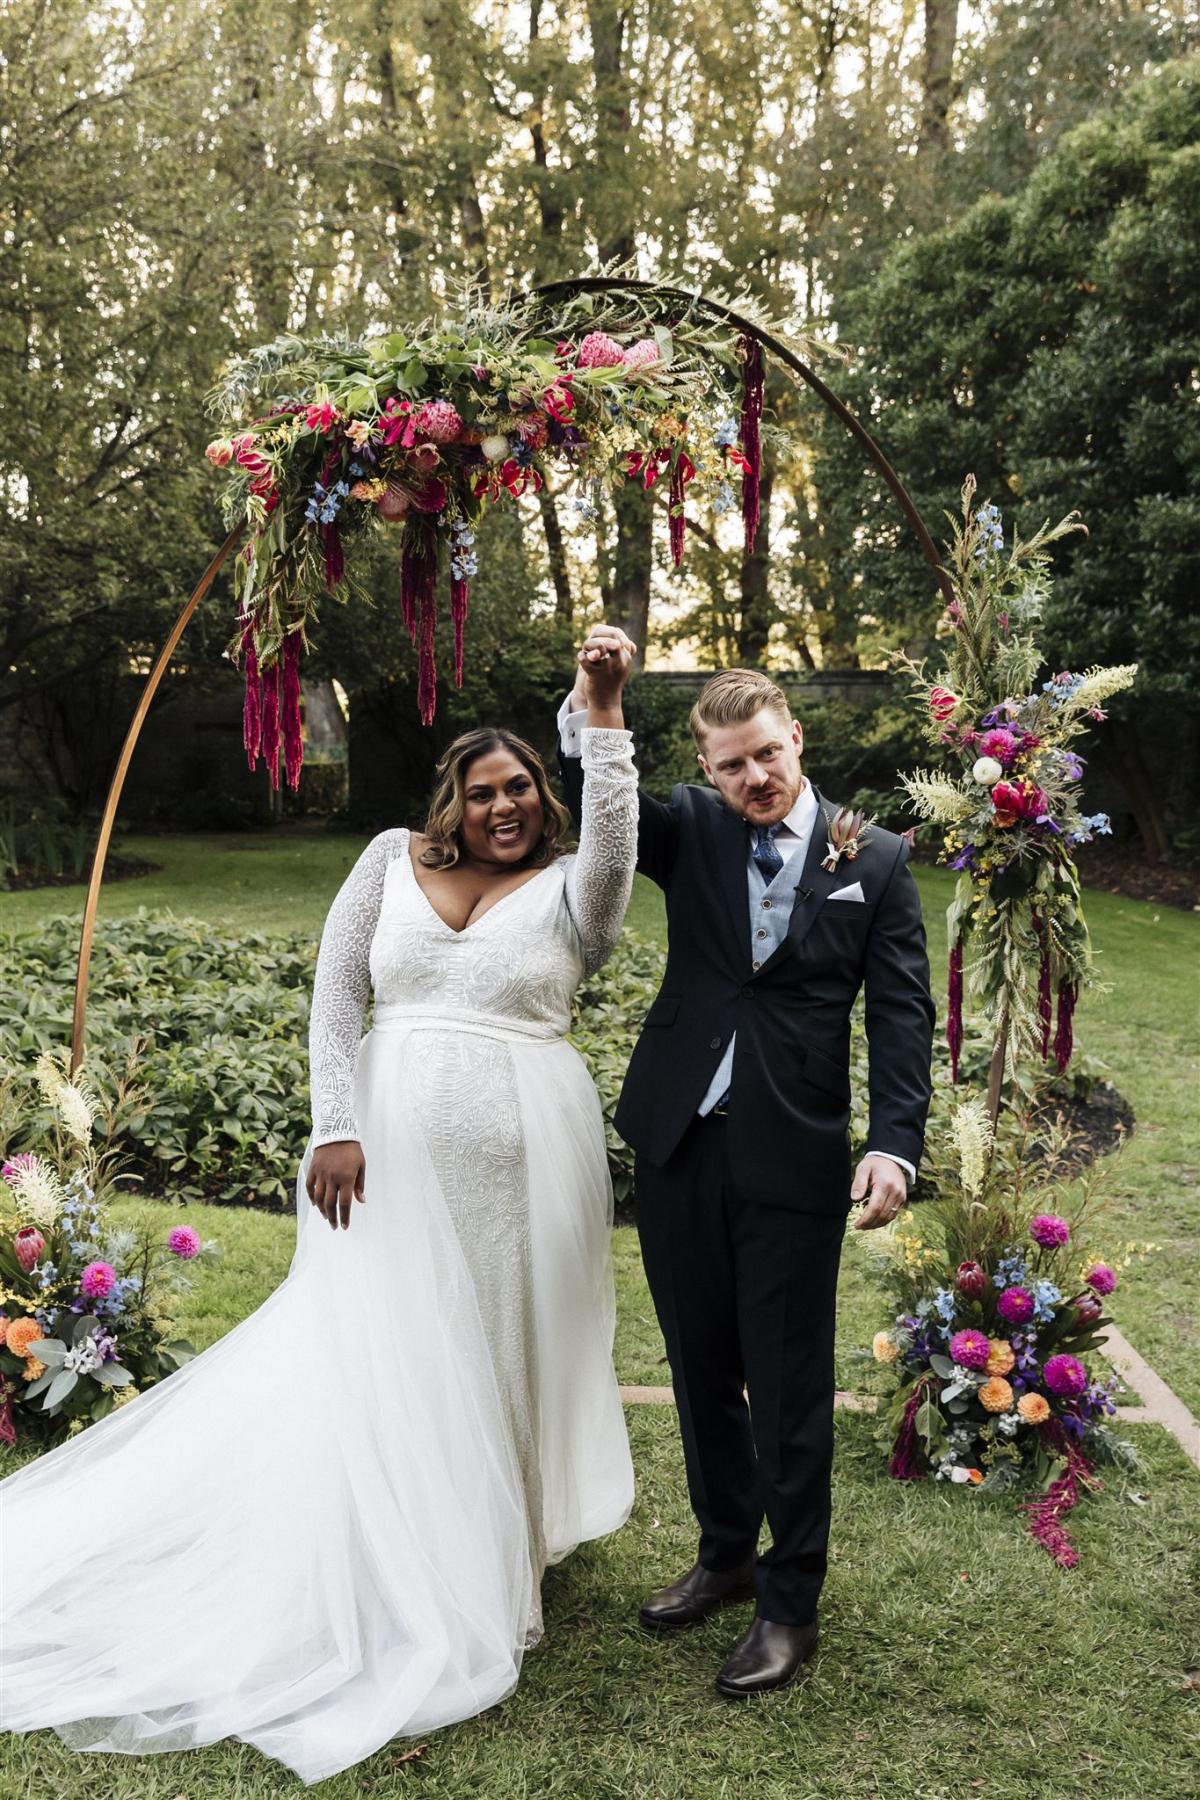 KWH real bride Nalini and Michael walking down the aisle as she wears the Celine gown with Alice train, a v-neck beaded wedding dress.